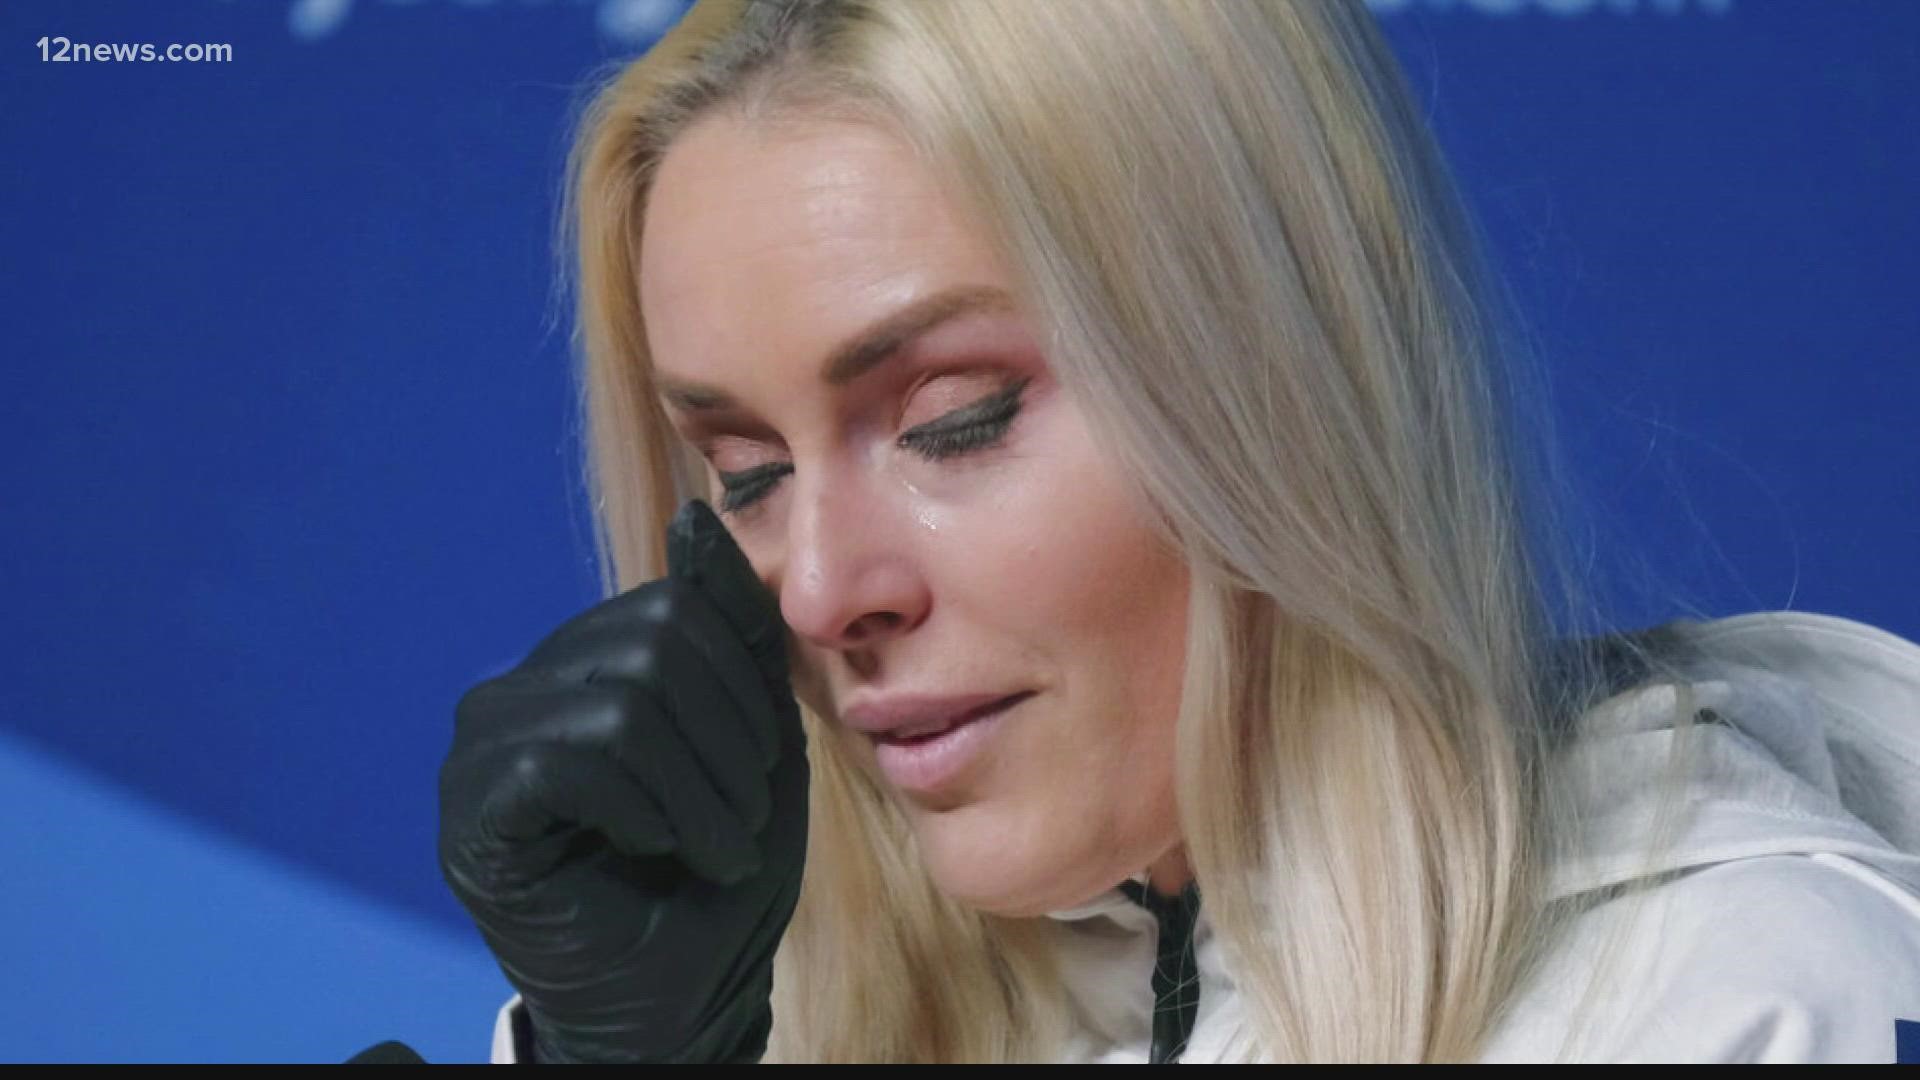 Vonn picked up skiing at a young age and has since used it to get through some of life's adversities.